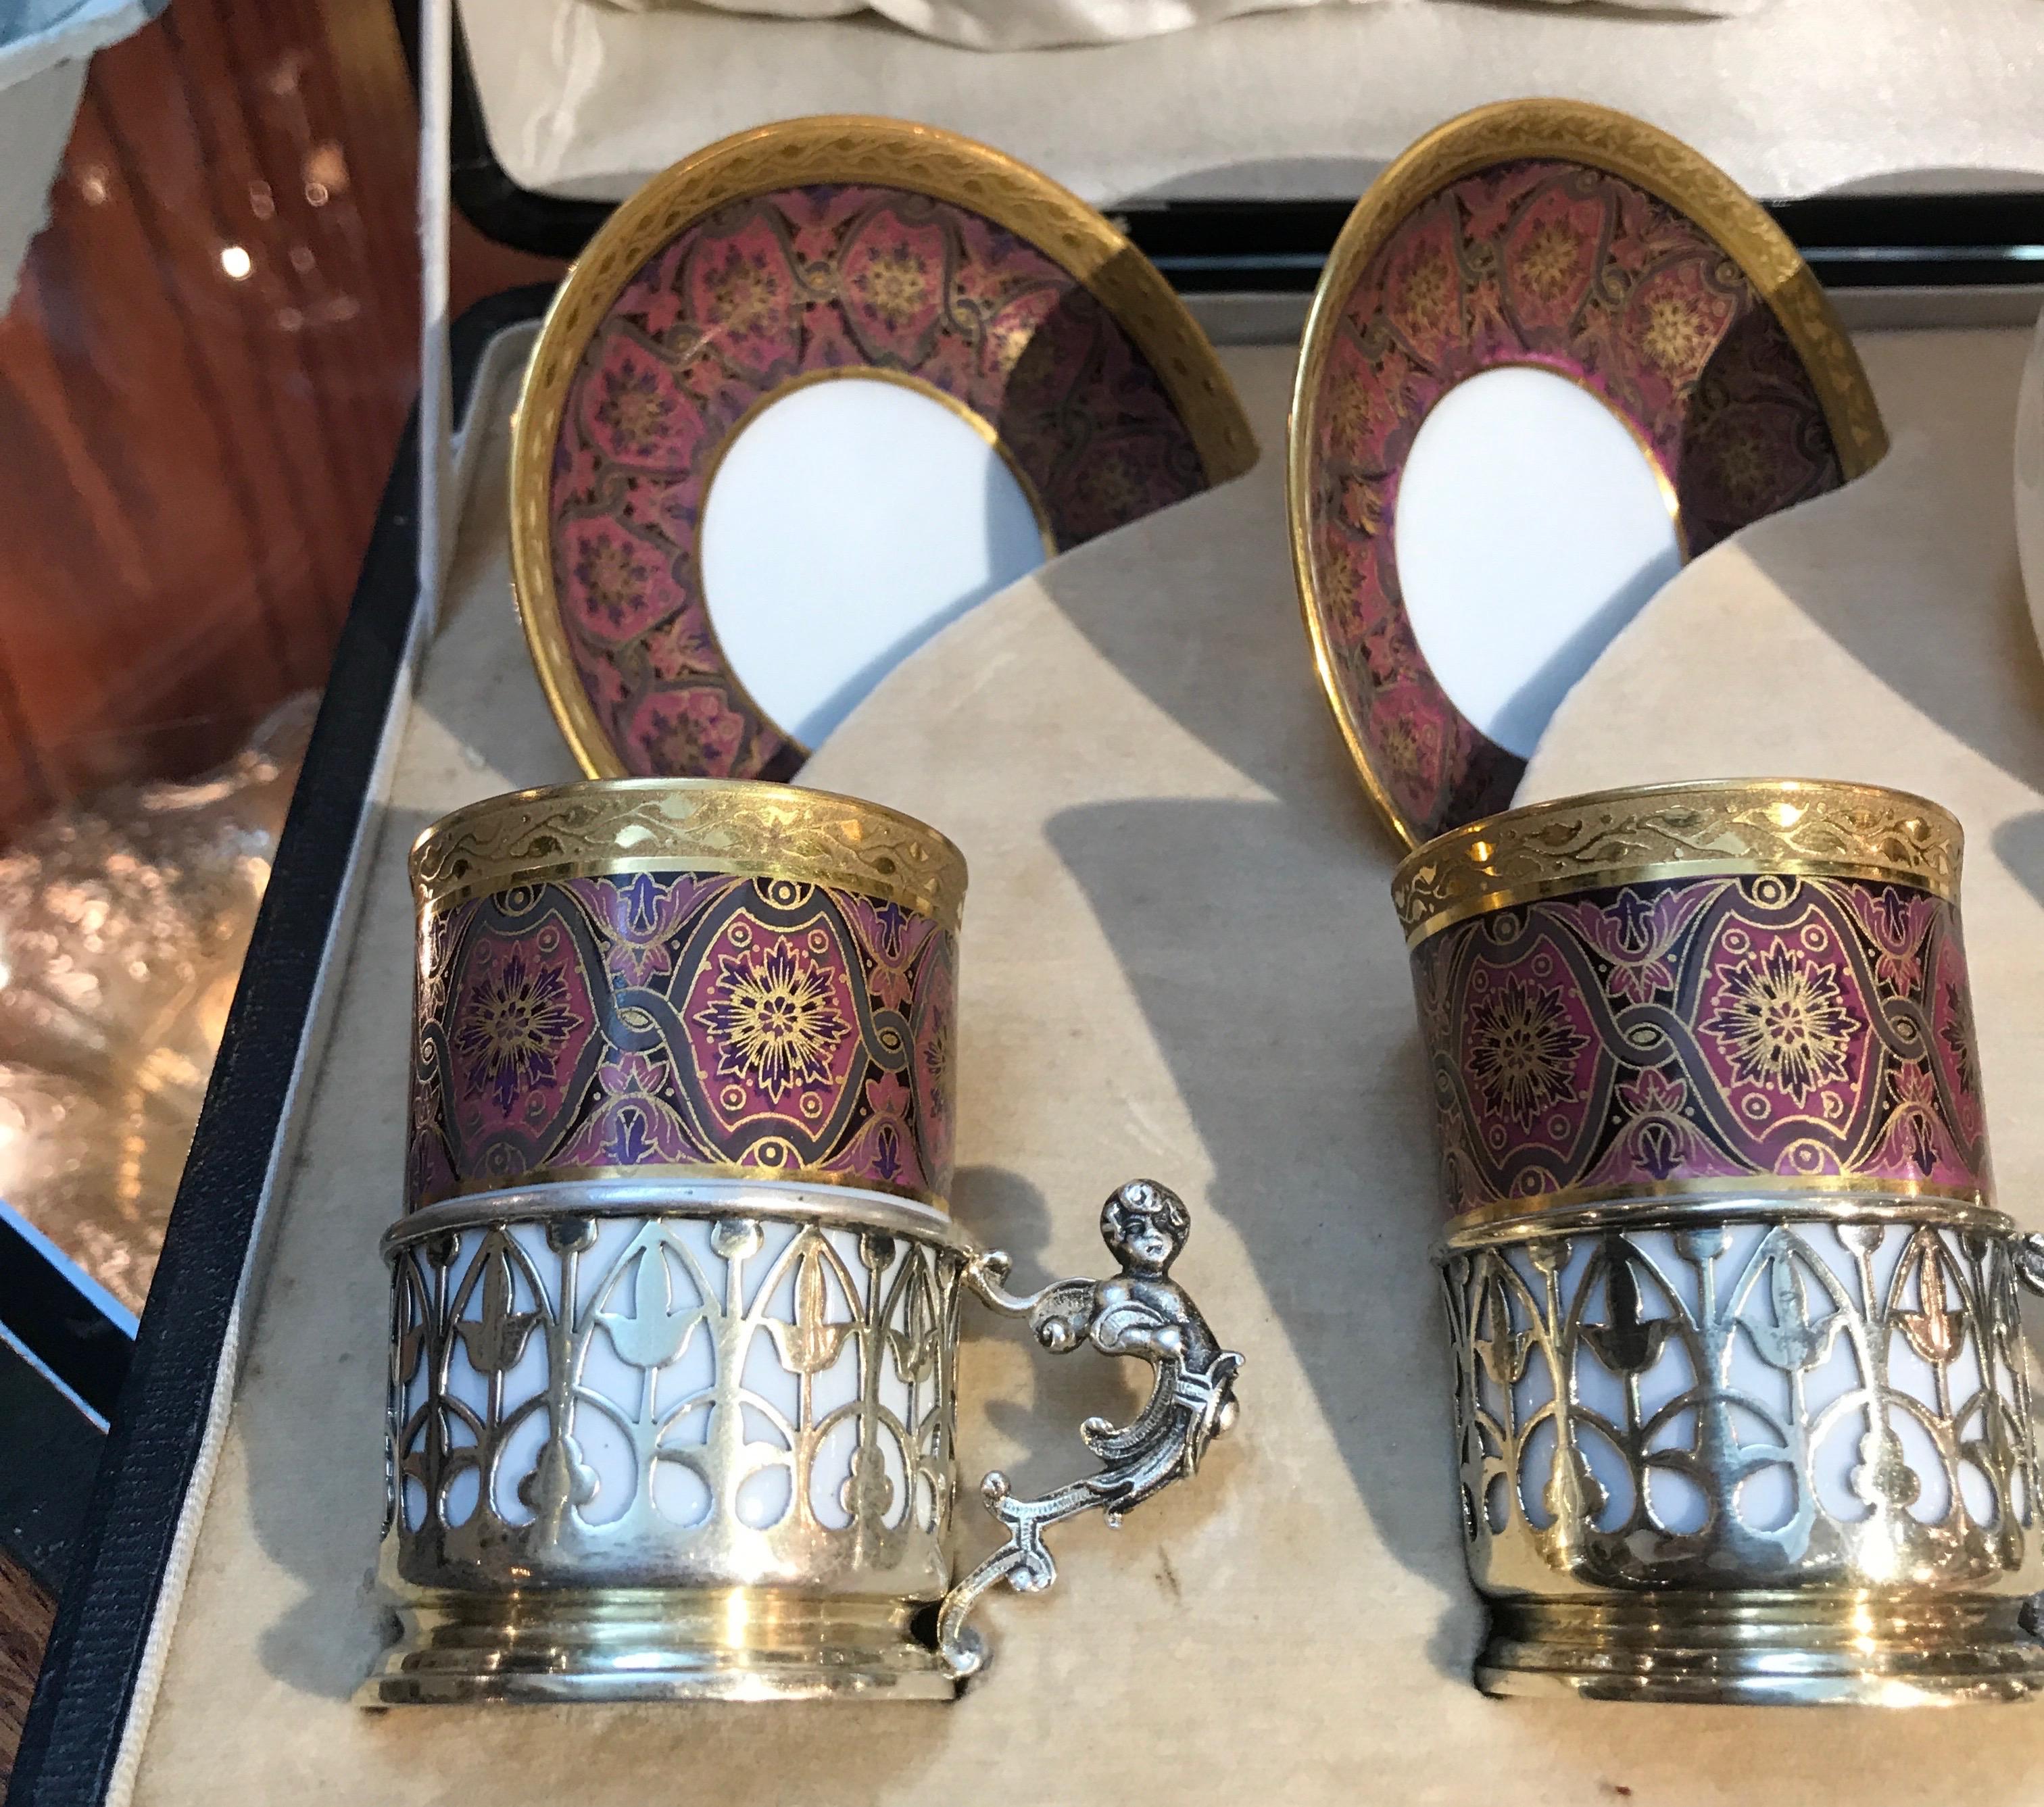 Elegant set of 4 Limoges French porcelain demitasse cups and saucers. The set with English Birmingham sterling silver holders in original presentation box. The set is decorated in a Persian design with gilt trim. The black leather covered box with